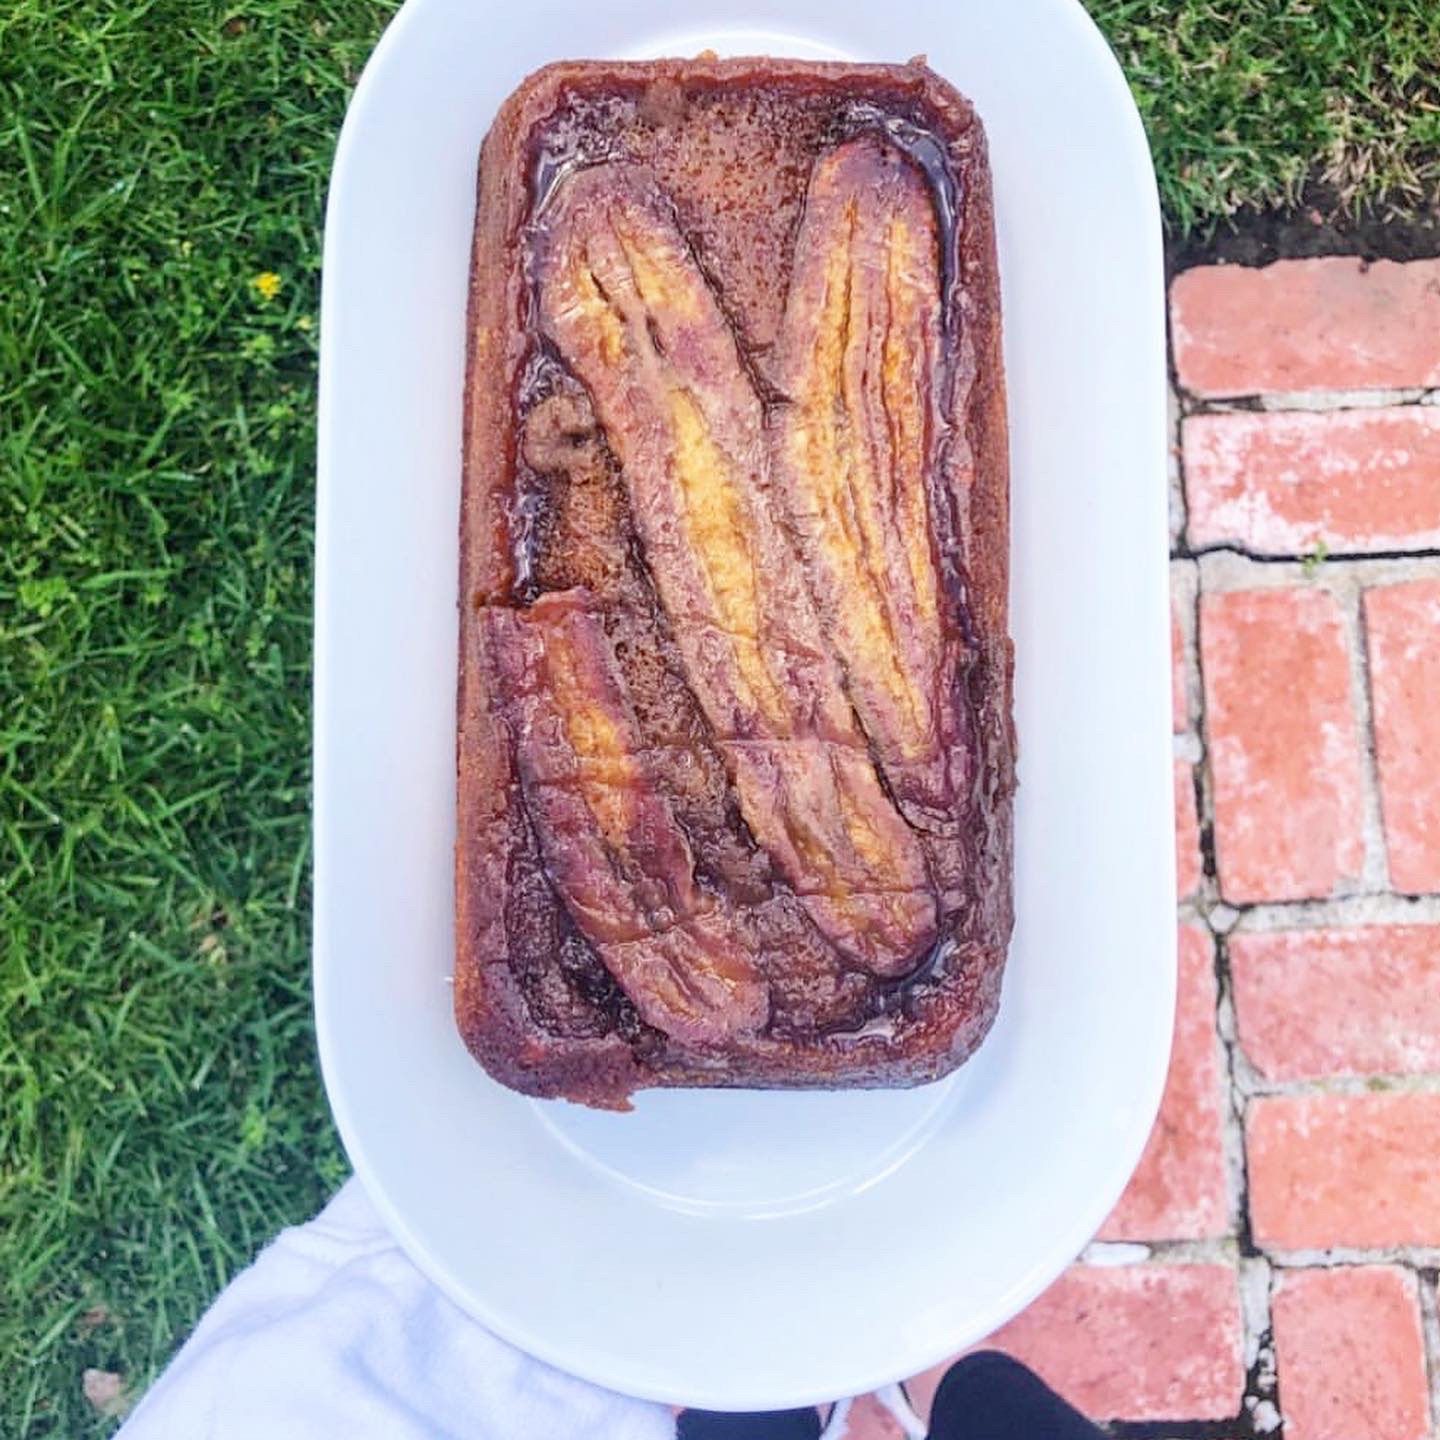 loaf of banana bread in tray